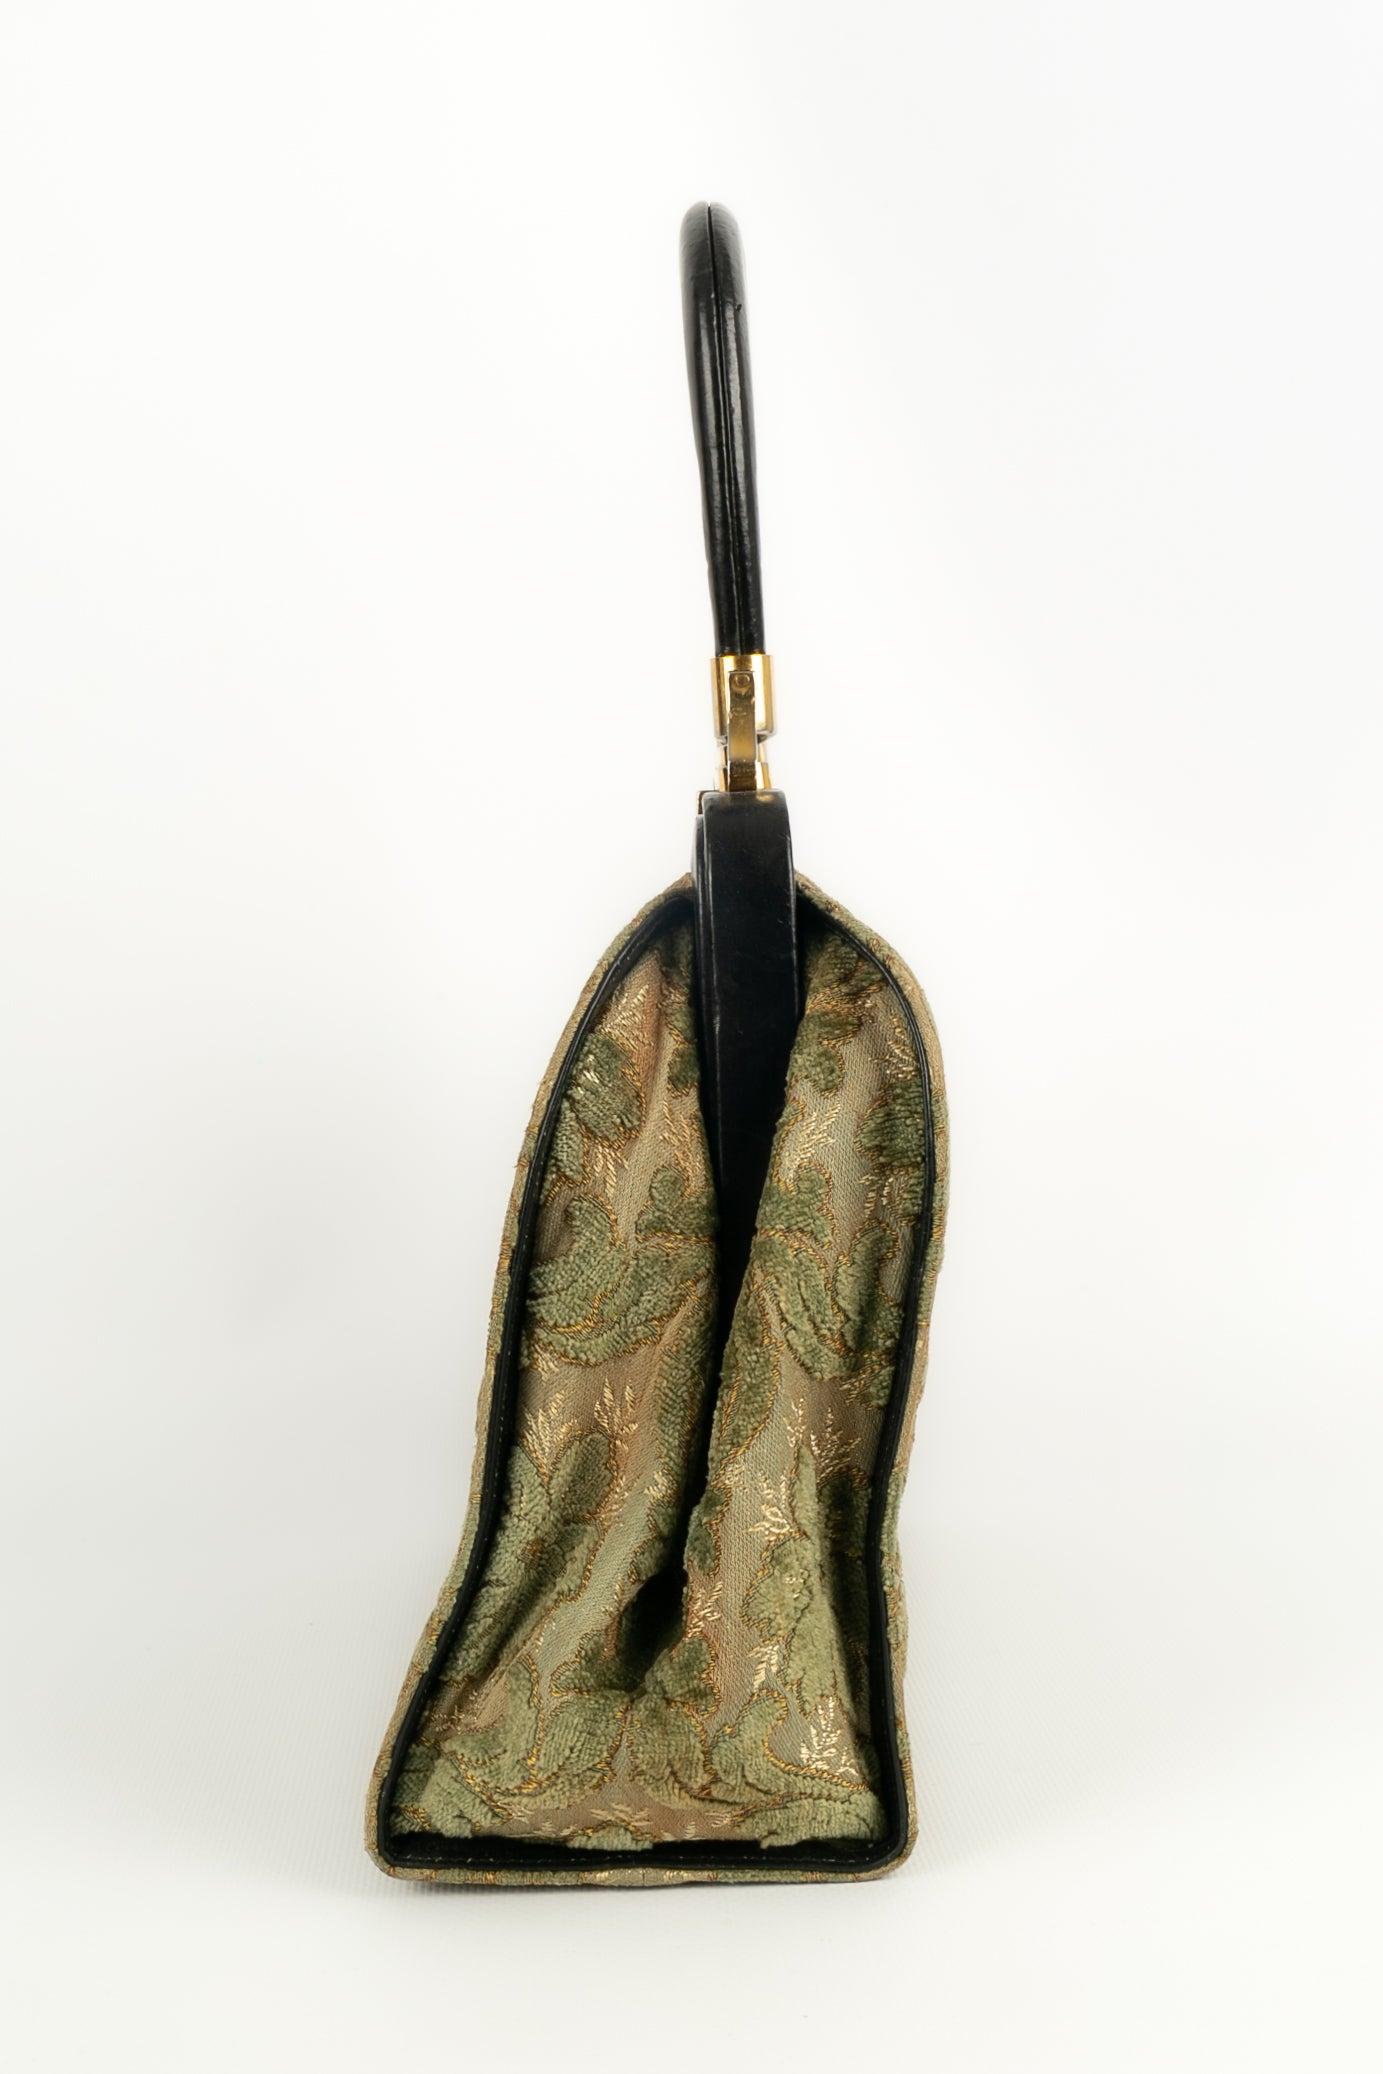 Velvet handbag in shades of green. 

Additional information:
Condition: Very good condition
Dimensions: Height: 19 cm - Length: 26.5 cm - Depth: 10 cm - Handle: 34 cm

Seller Reference: S186